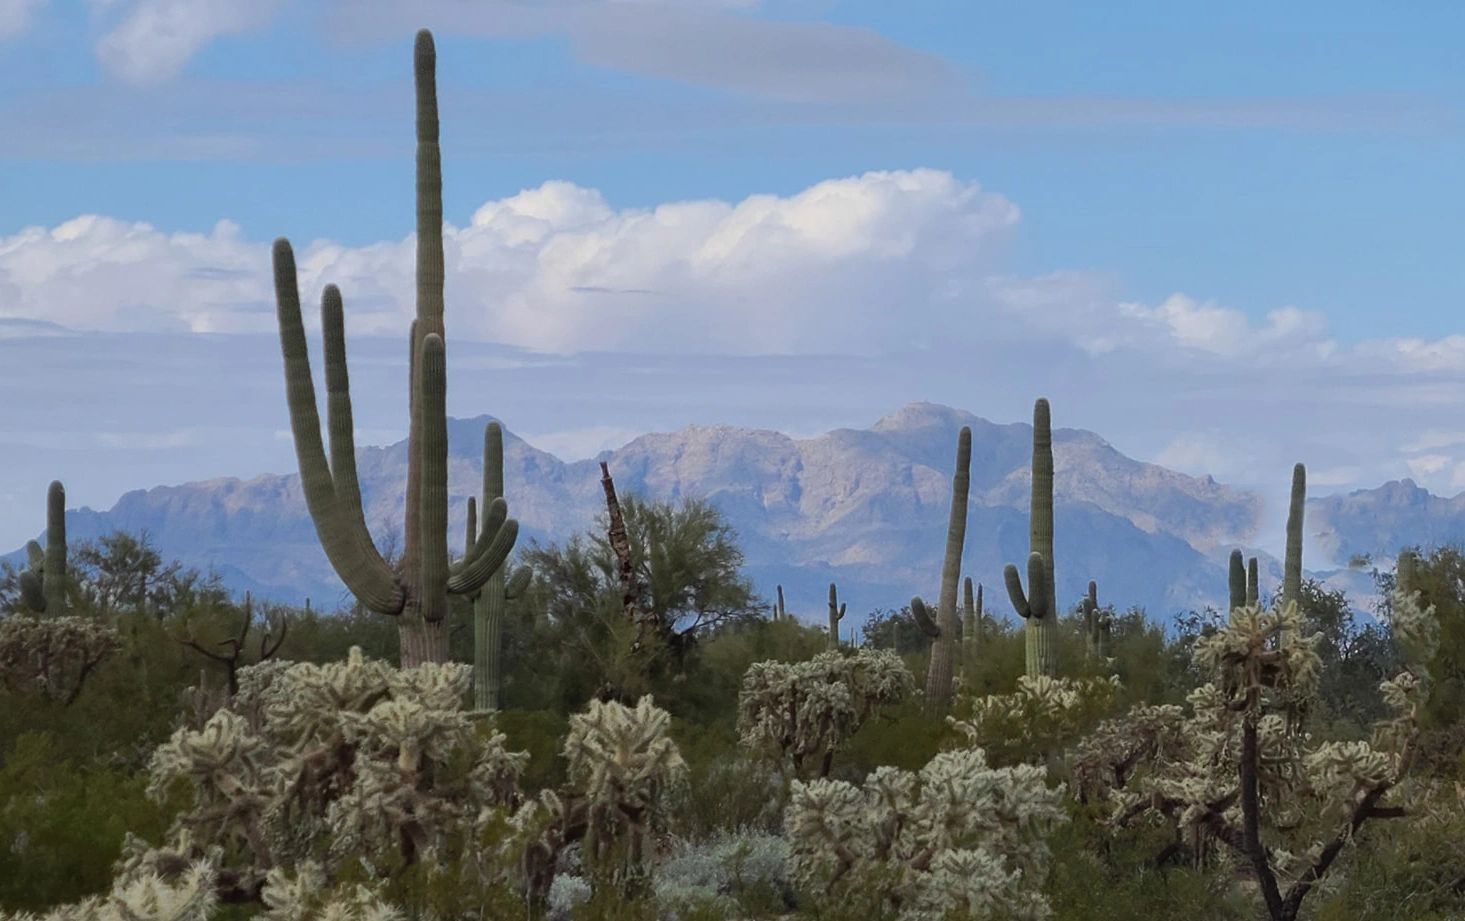 An area of the southwest of cactus, some in bloom, with mountains in the distance.